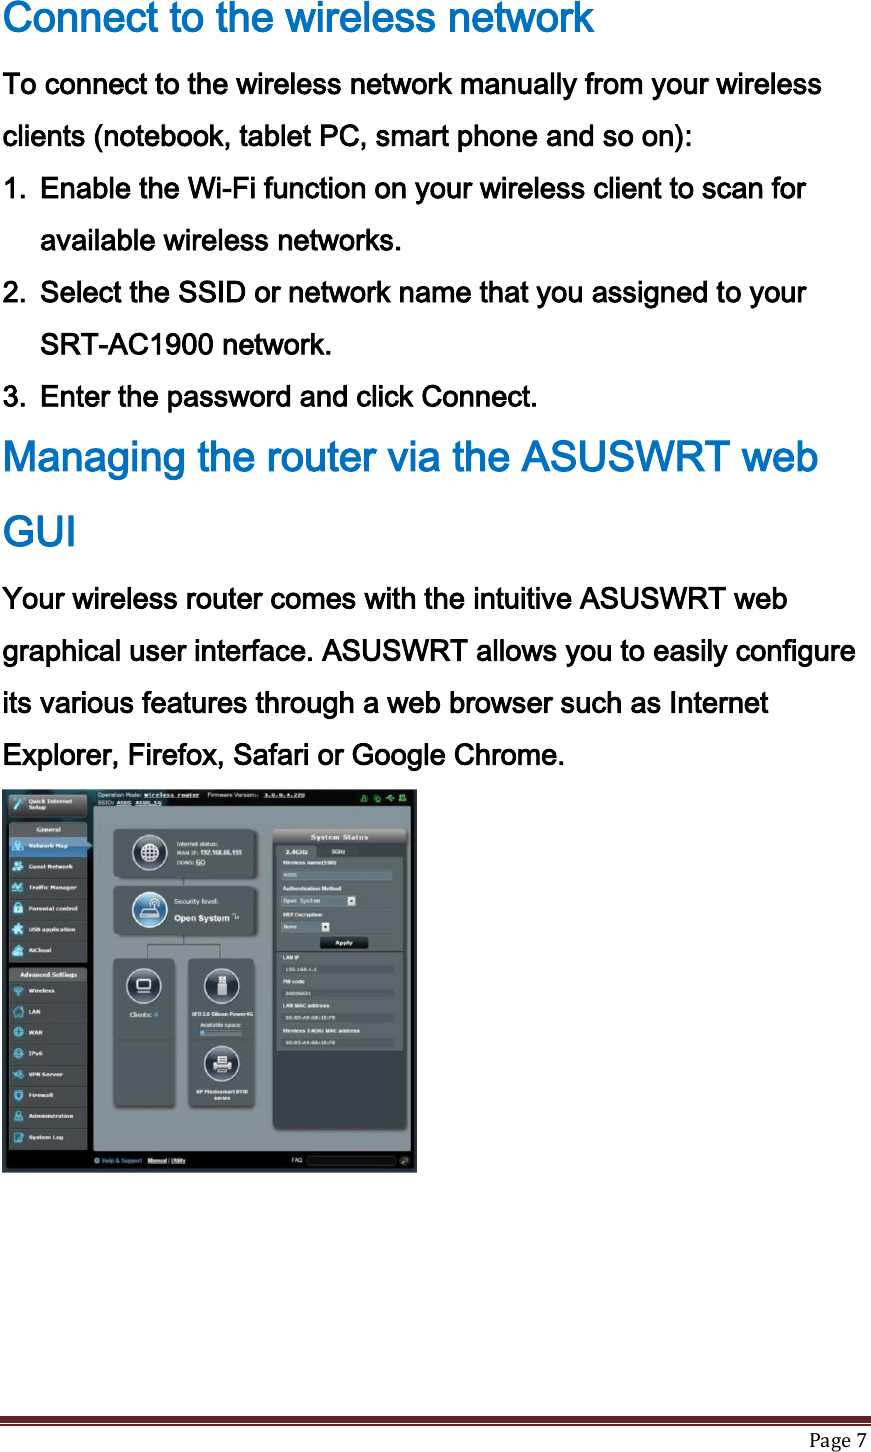   Page 7  Connect to the wireless network To connect to the wireless network manually from your wireless clients (notebook, tablet PC, smart phone and so on): 1. Enable the Wi-Fi function on your wireless client to scan for available wireless networks. 2. Select the SSID or network name that you assigned to your SRT-AC1900 network. 3. Enter the password and click Connect. Managing the router via the ASUSWRT web GUI Your wireless router comes with the intuitive ASUSWRT web graphical user interface. ASUSWRT allows you to easily configure its various features through a web browser such as Internet Explorer, Firefox, Safari or Google Chrome.  